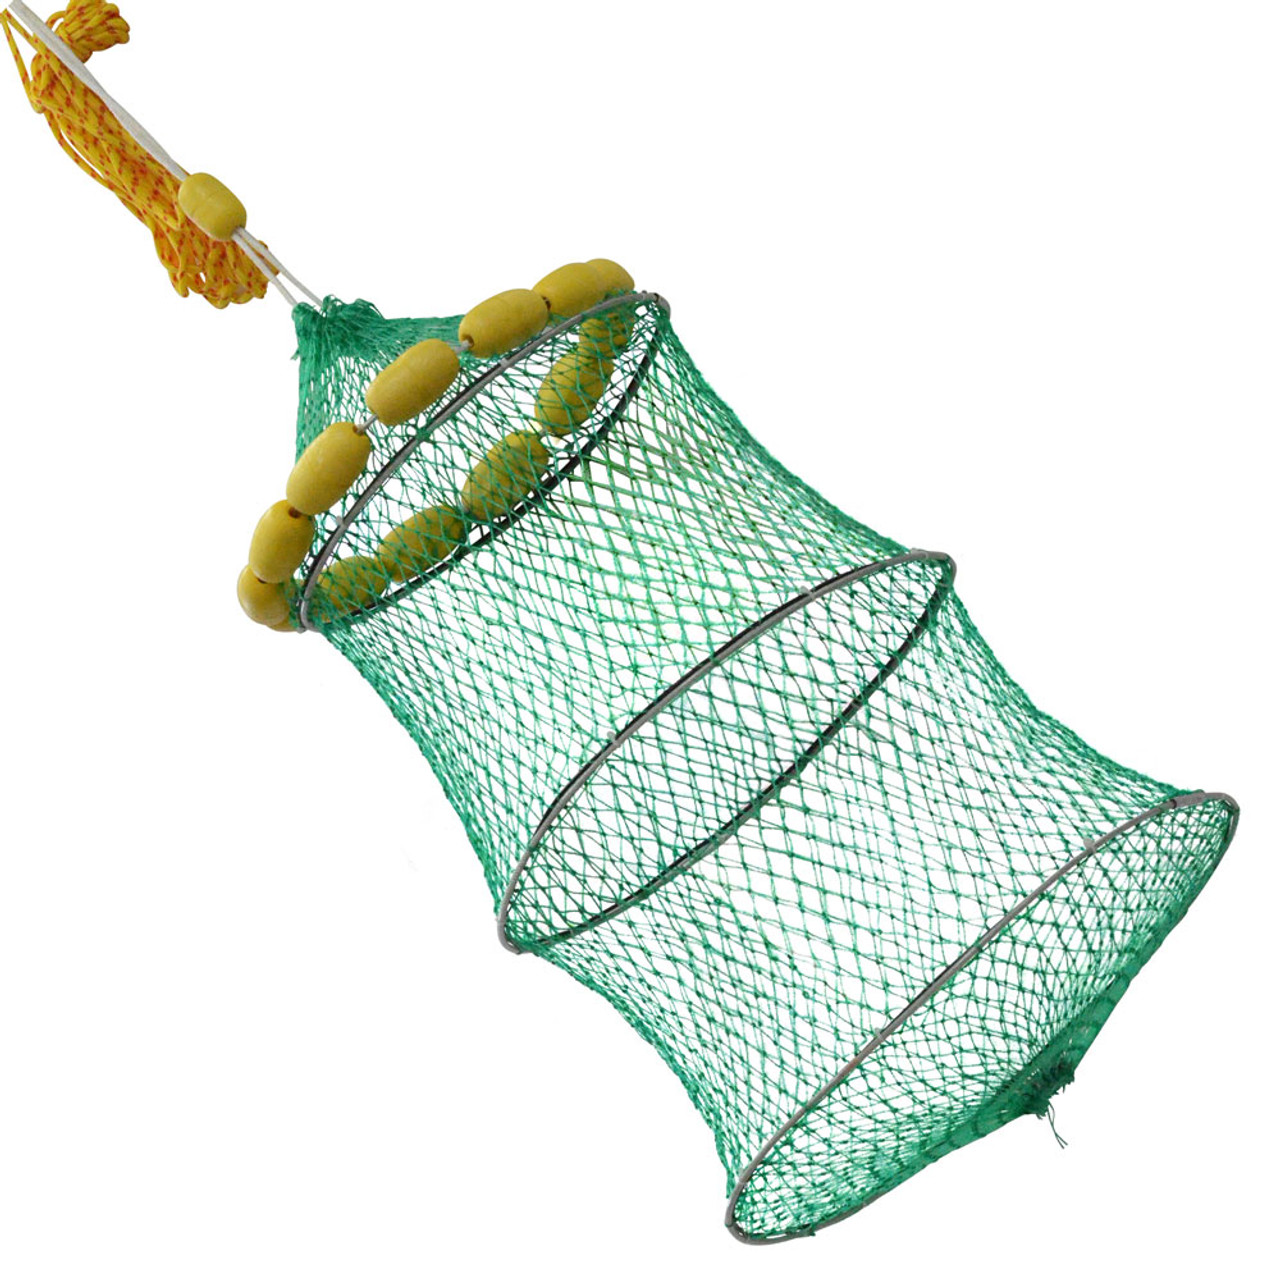 Maxer Keeper net with Floats - Floating